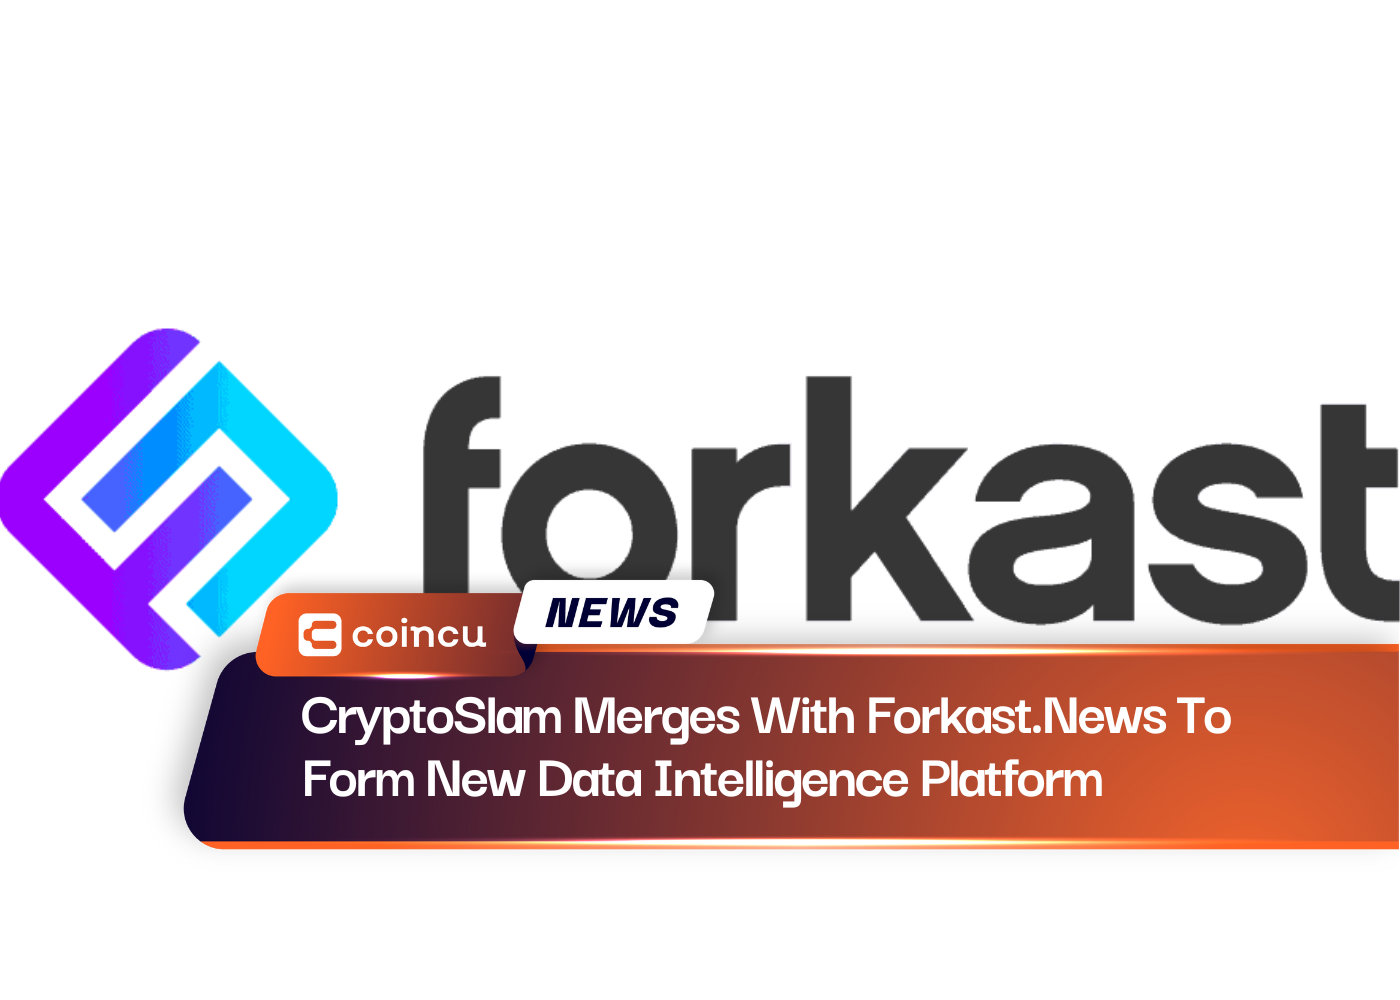 CryptoSlam Merges With Forkast.News To Form New Data Intelligence Platform